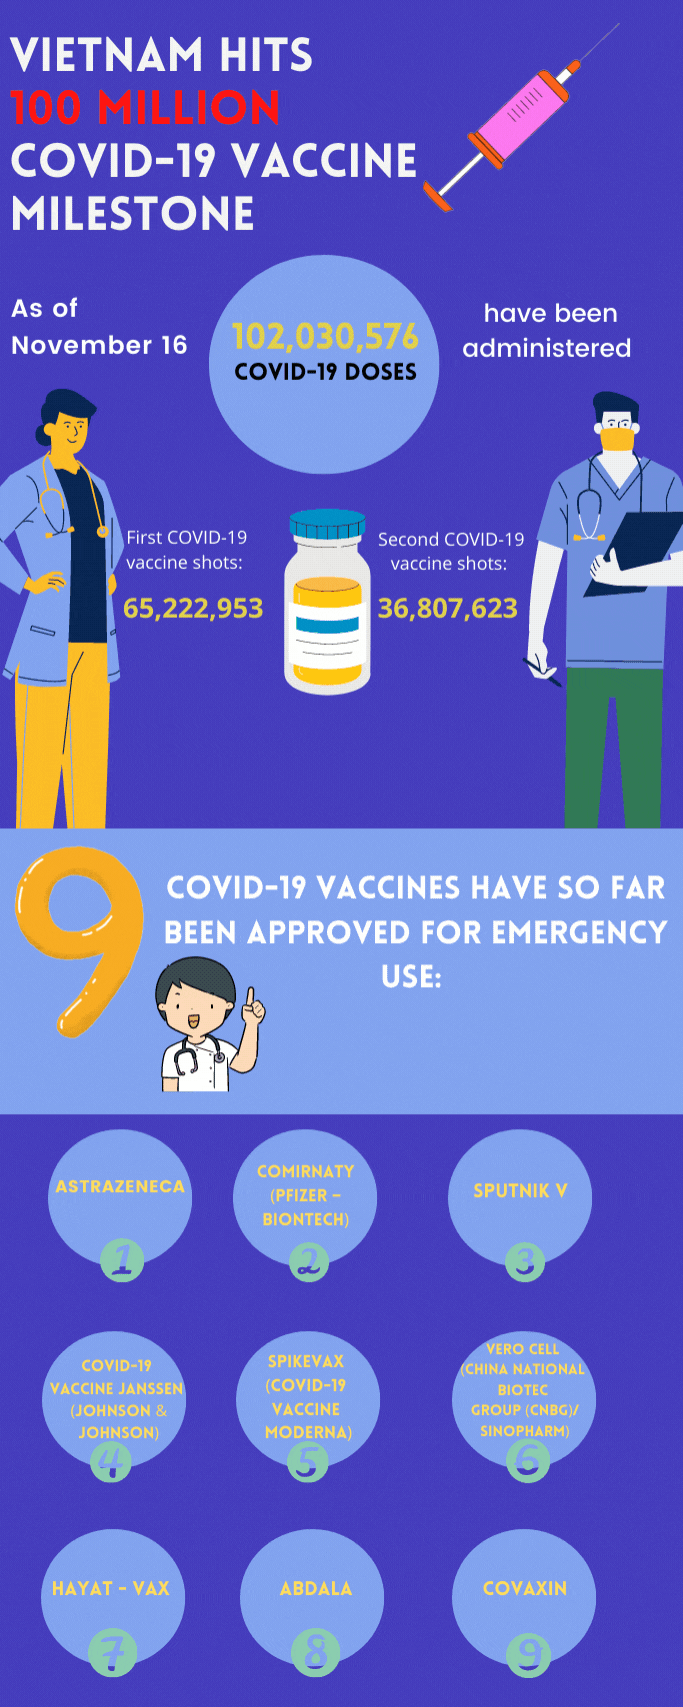 adminstered covid-19 vaccines in vietnam cross 100 million mark picture 1